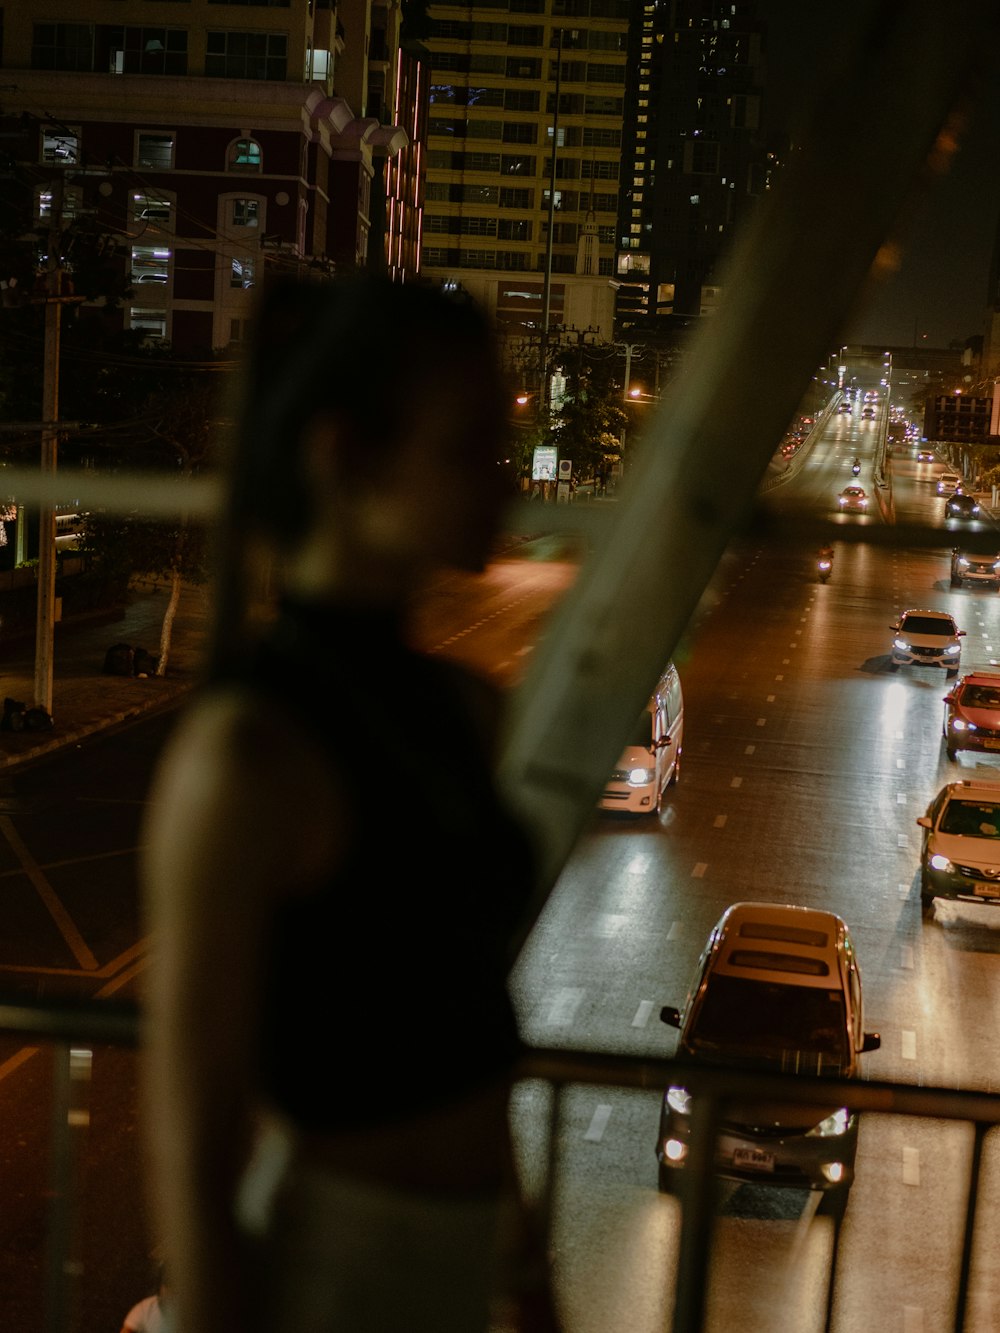 a woman standing on a balcony overlooking a city street at night